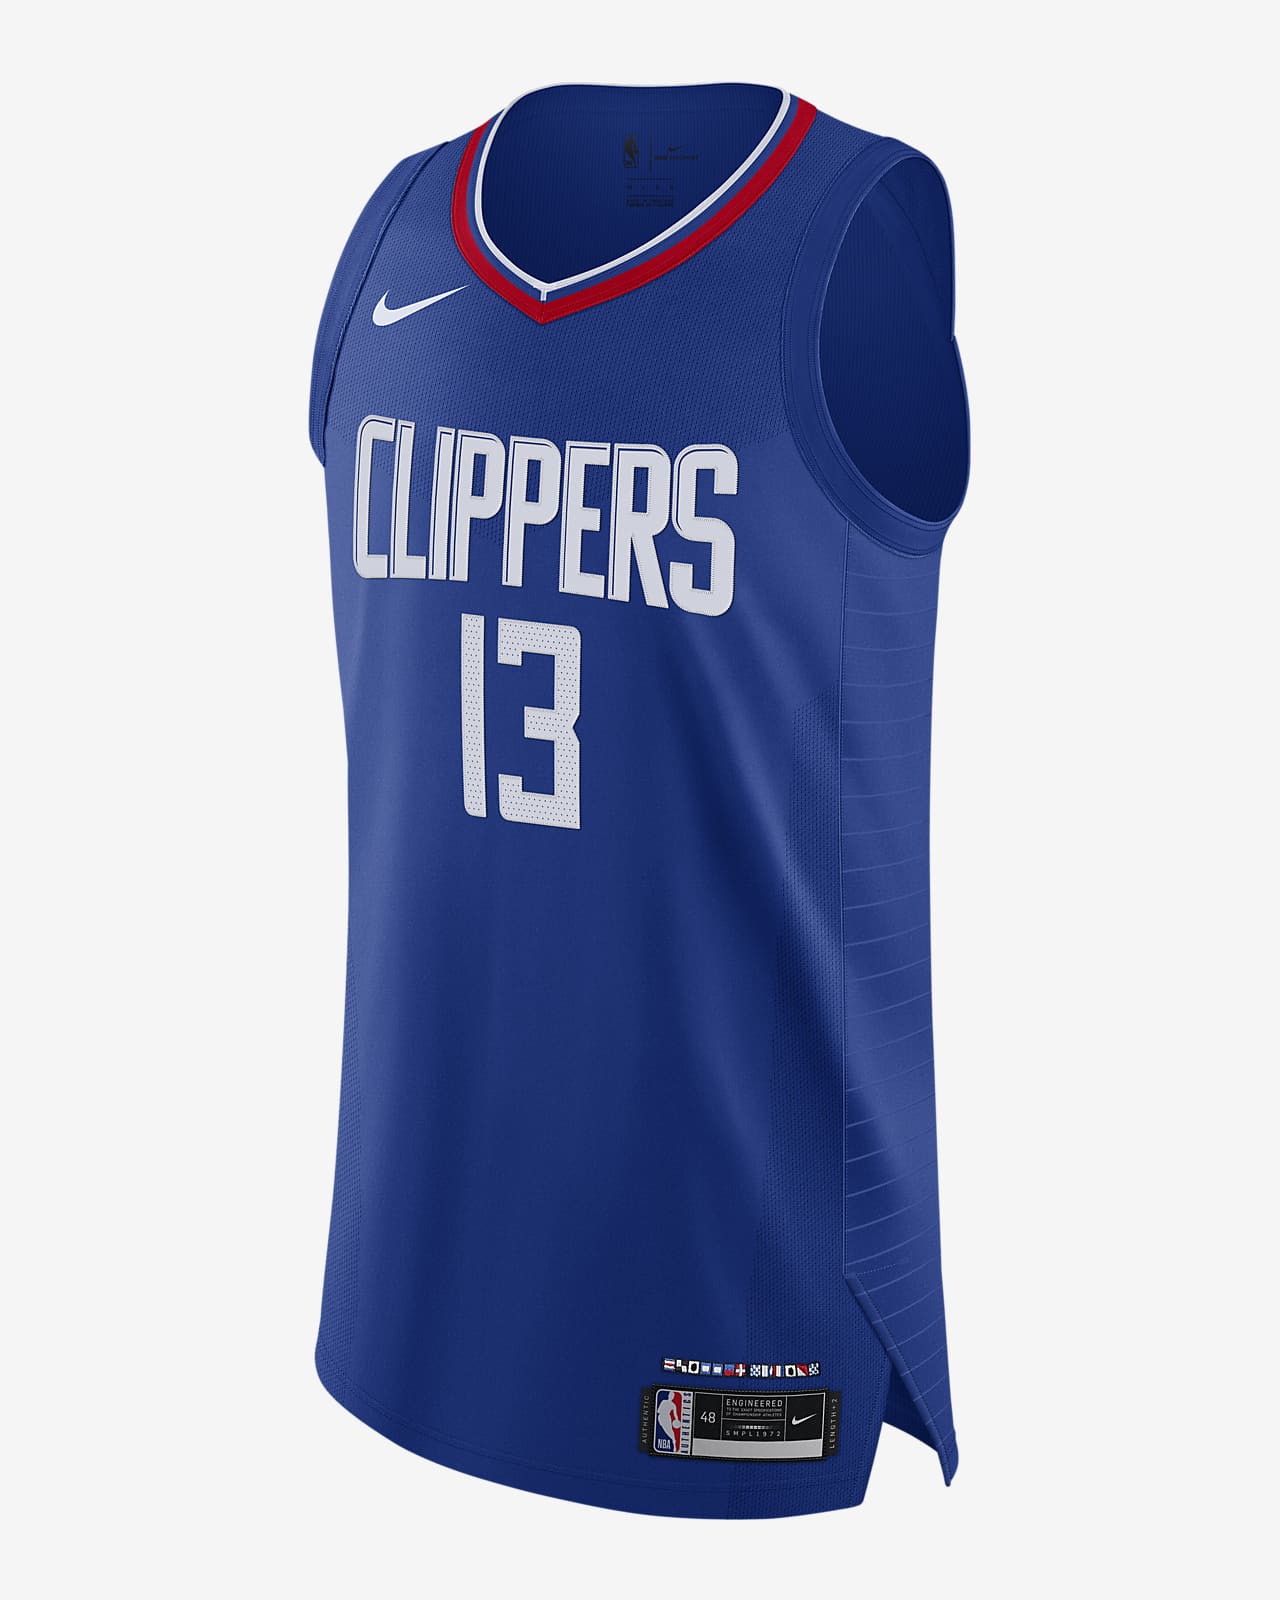 George Clippers Icon Edition 2020 Nike NBA Authentic Jersey. Nike.com